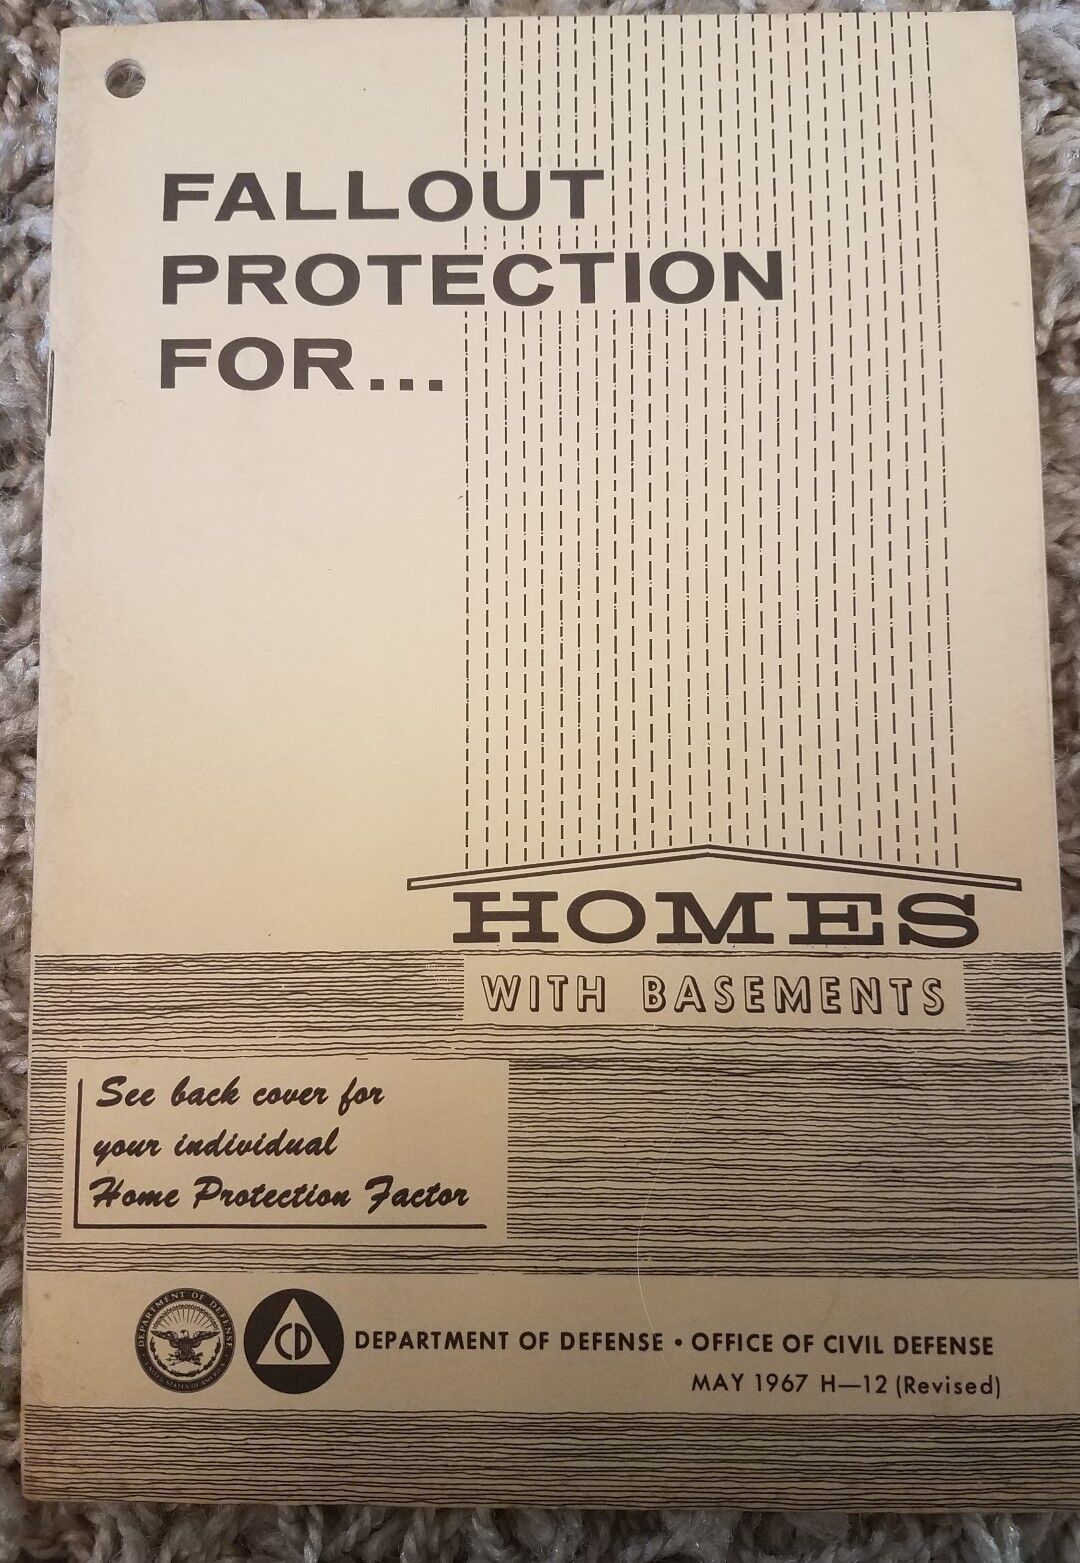 1967 DOD Civil Defence Fallout Protection For Homes W/ Basements- Cold War Good